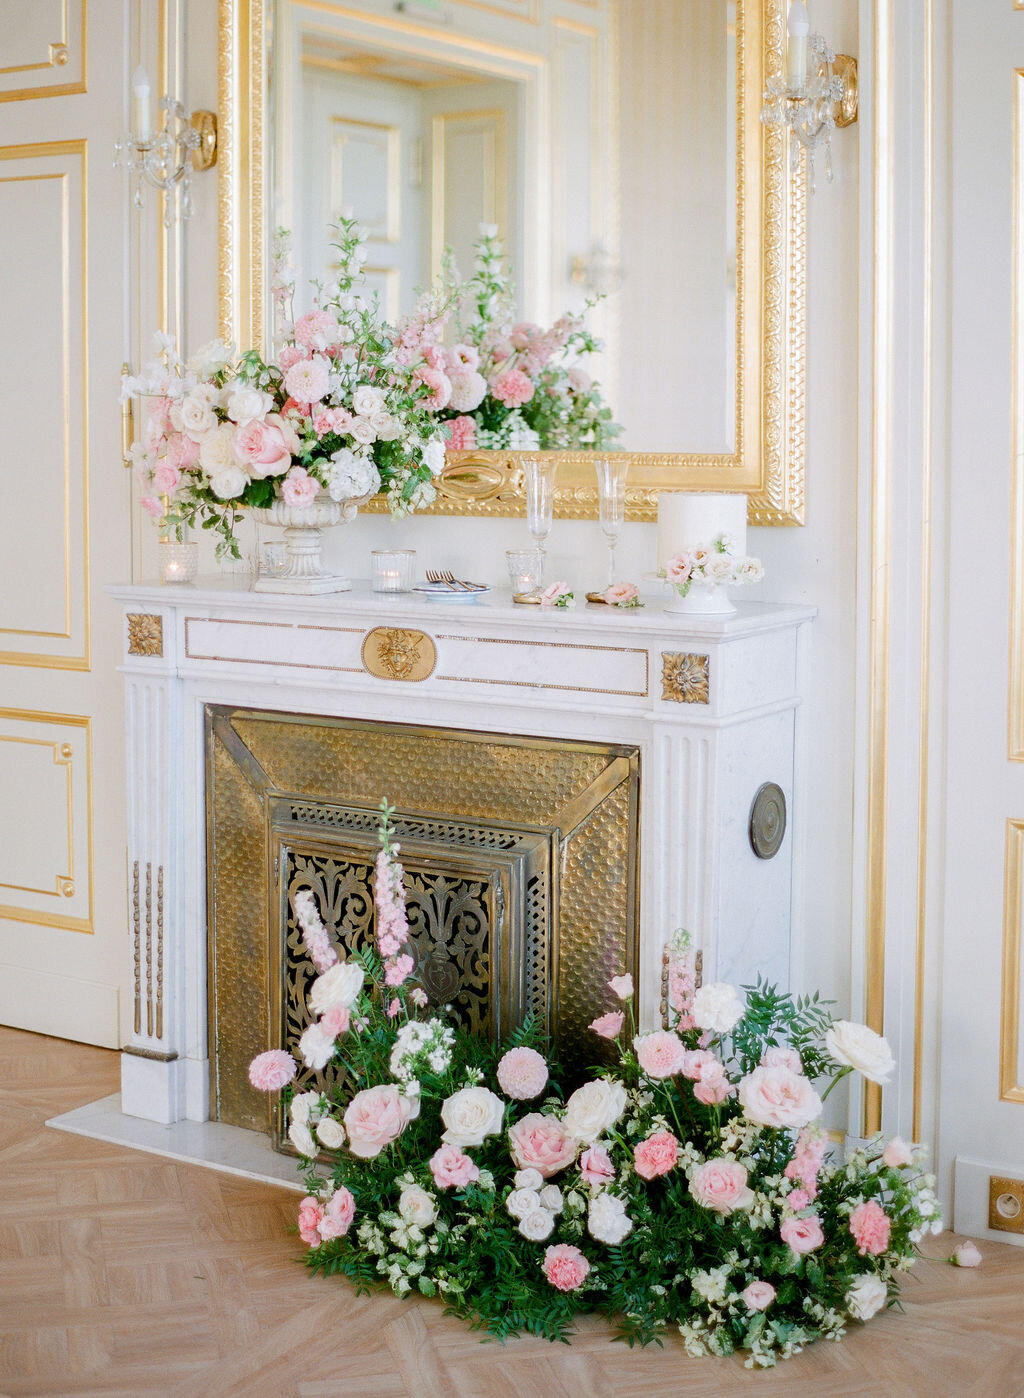 Jennifer Fox Weddings English speaking wedding planning & design agency in France crafting refined and bespoke weddings and celebrations Provence, Paris and destination Alyssa-Aaron-Wedding-Molly-Carr-Photography-First-Look-23